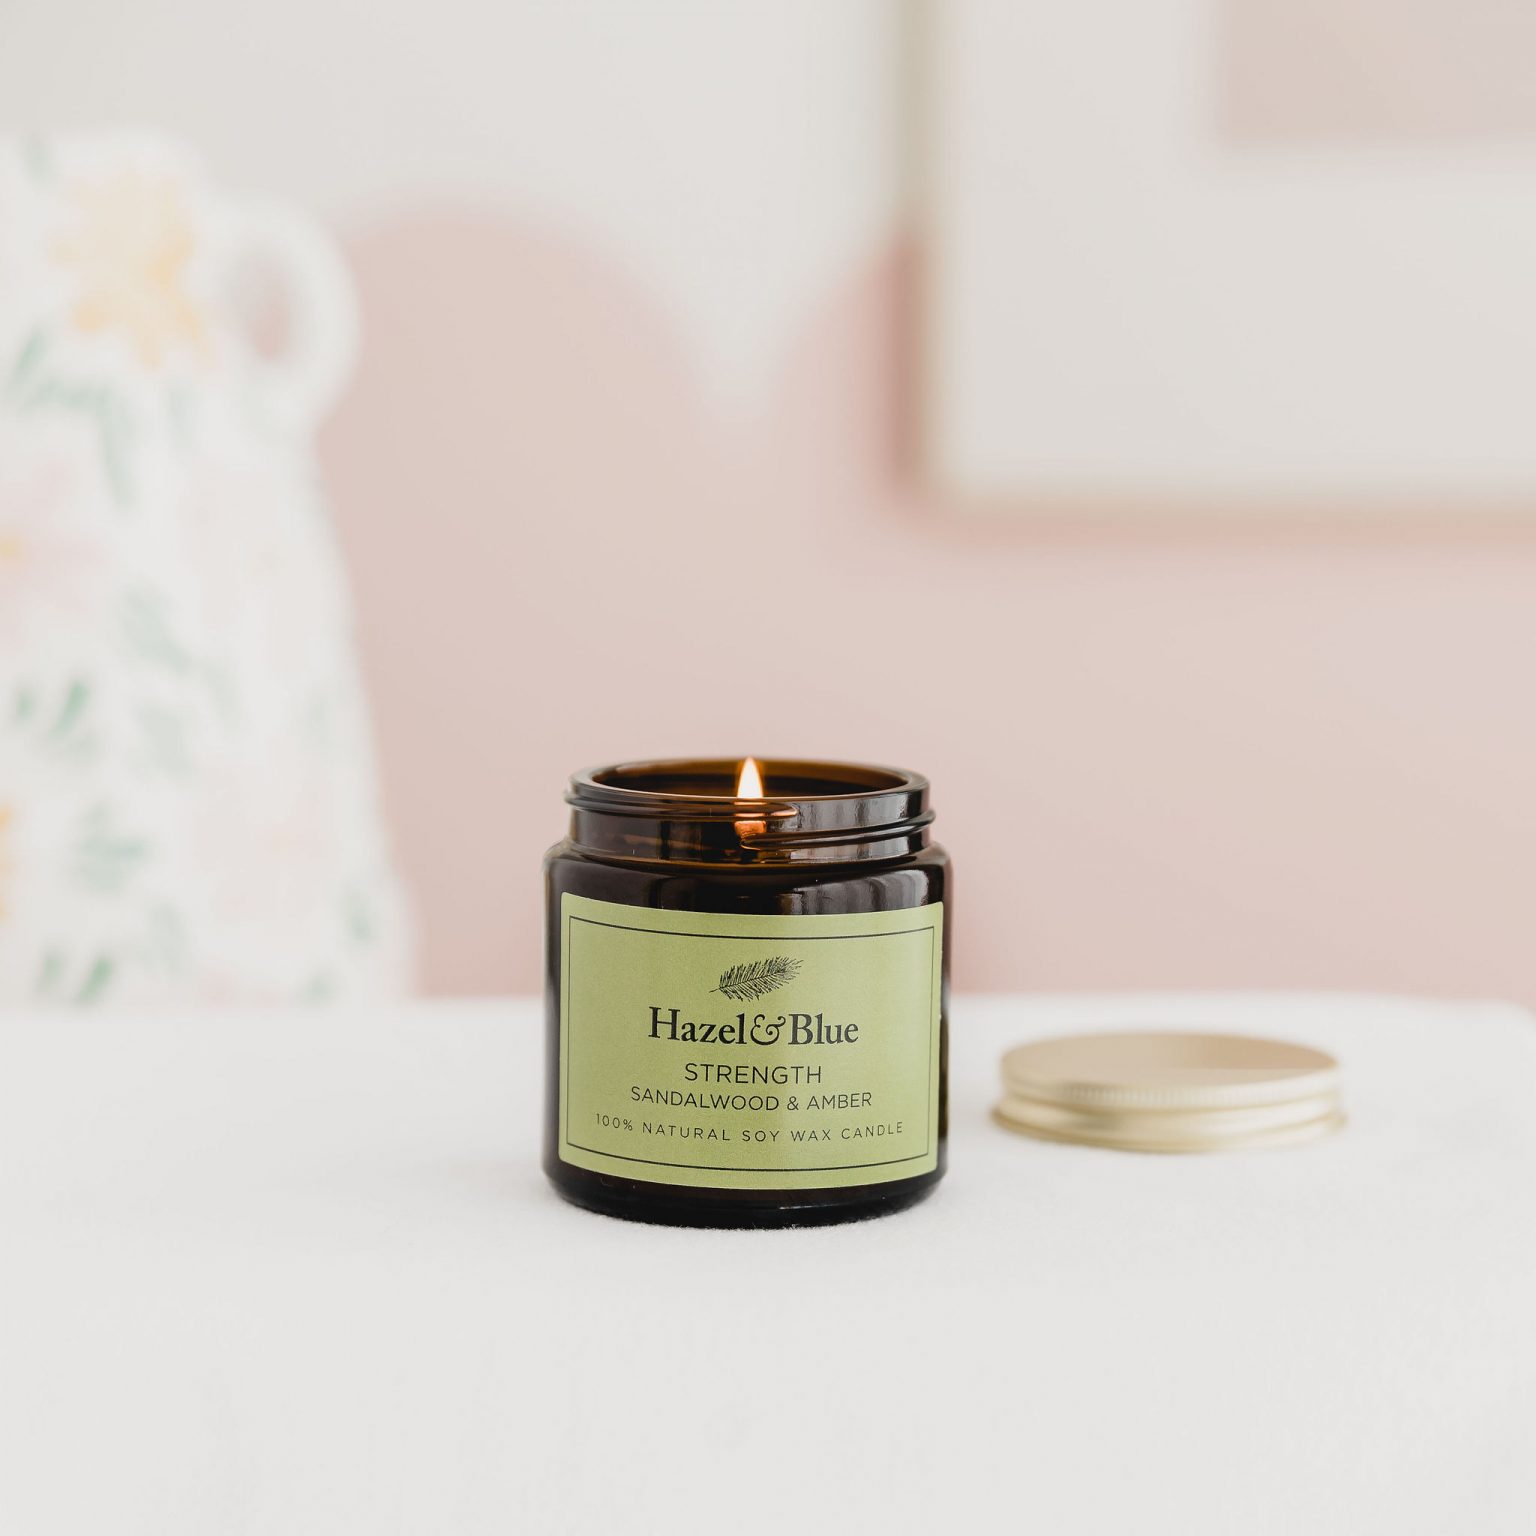 sandalwood and amber soy candle inner strength manifestation wellness soy candle gift wellbeing uk